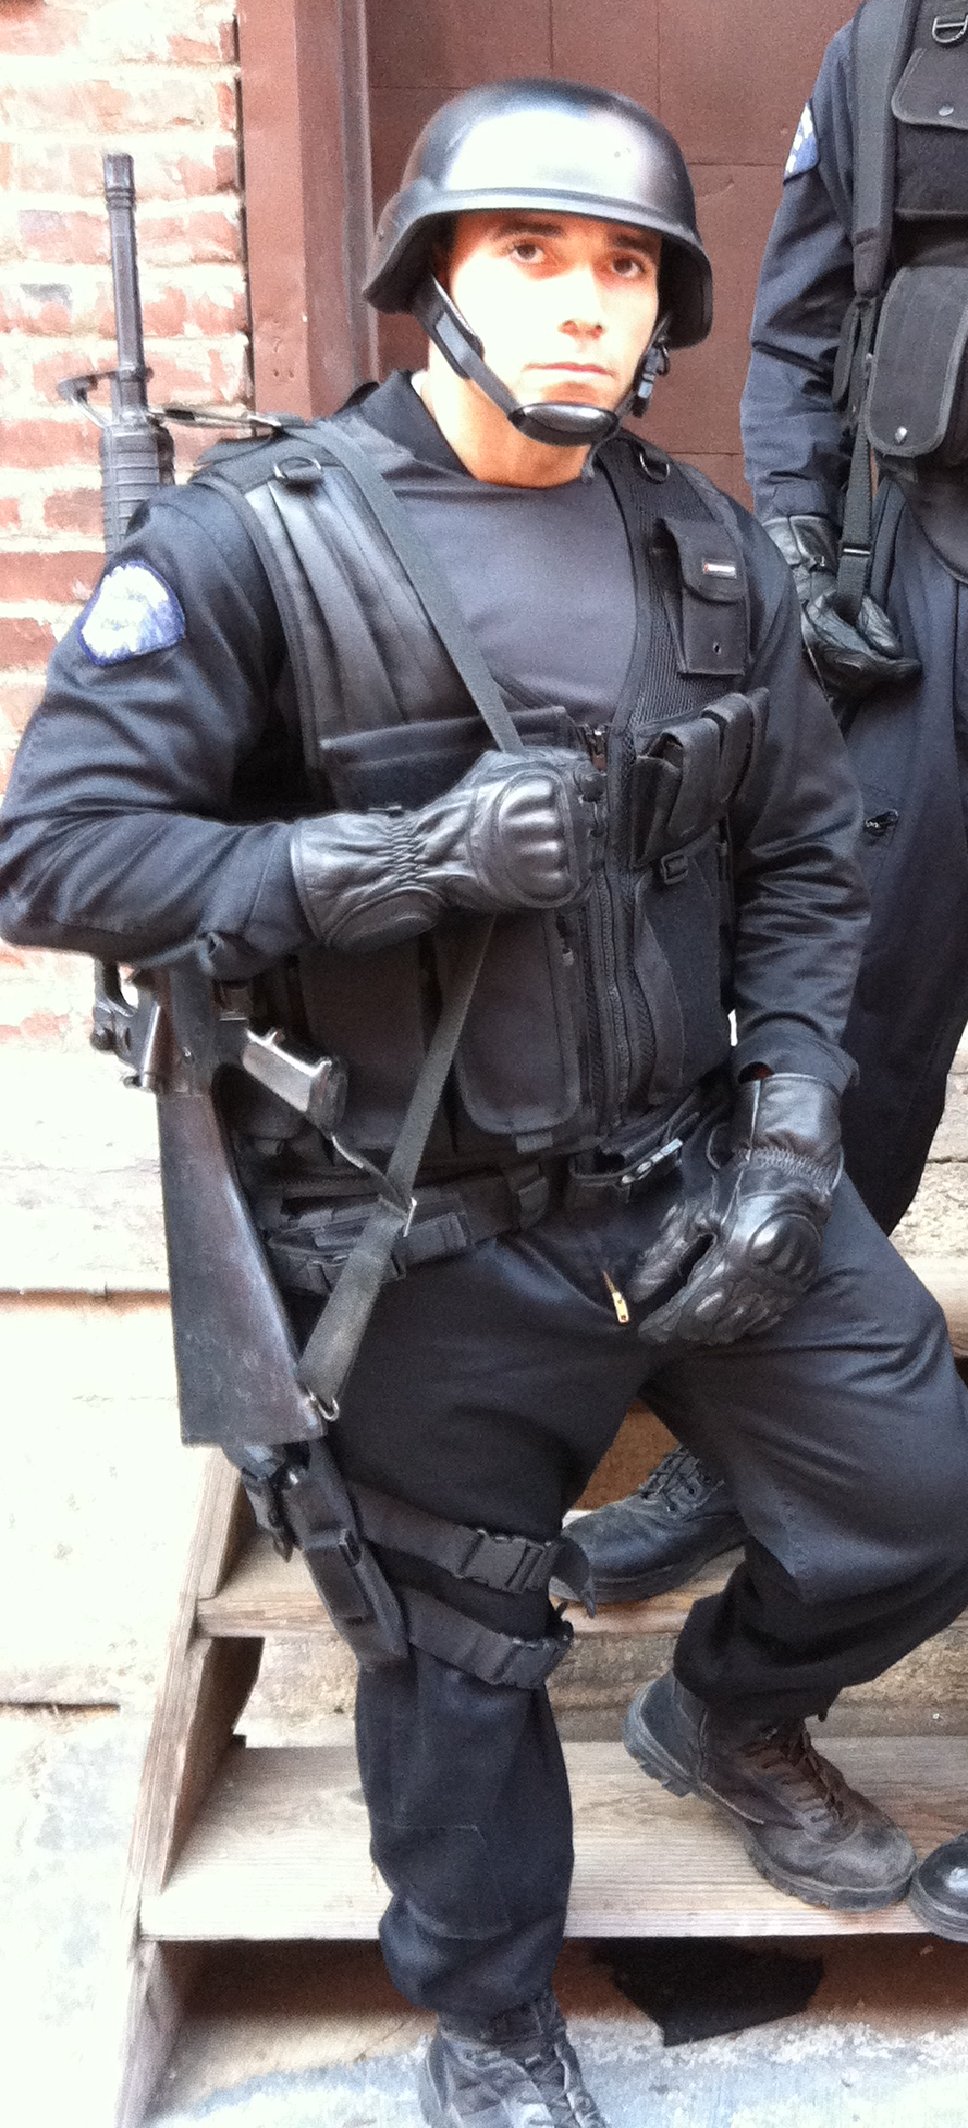 Shannon cast as a SWAT officer on the set of the feature film 